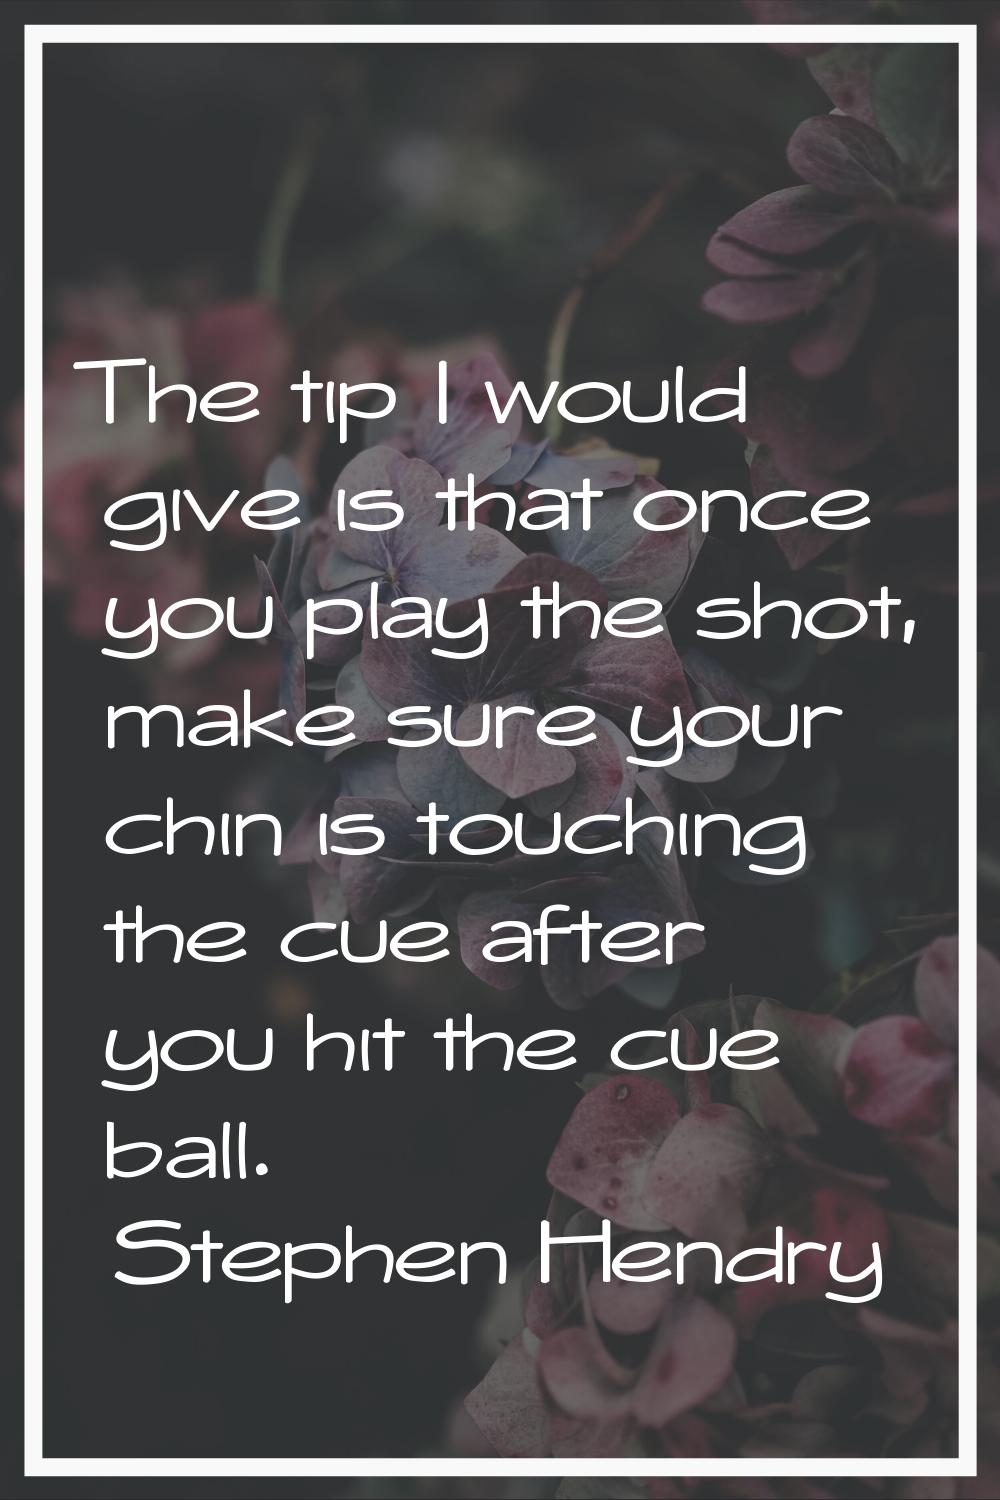 The tip I would give is that once you play the shot, make sure your chin is touching the cue after 